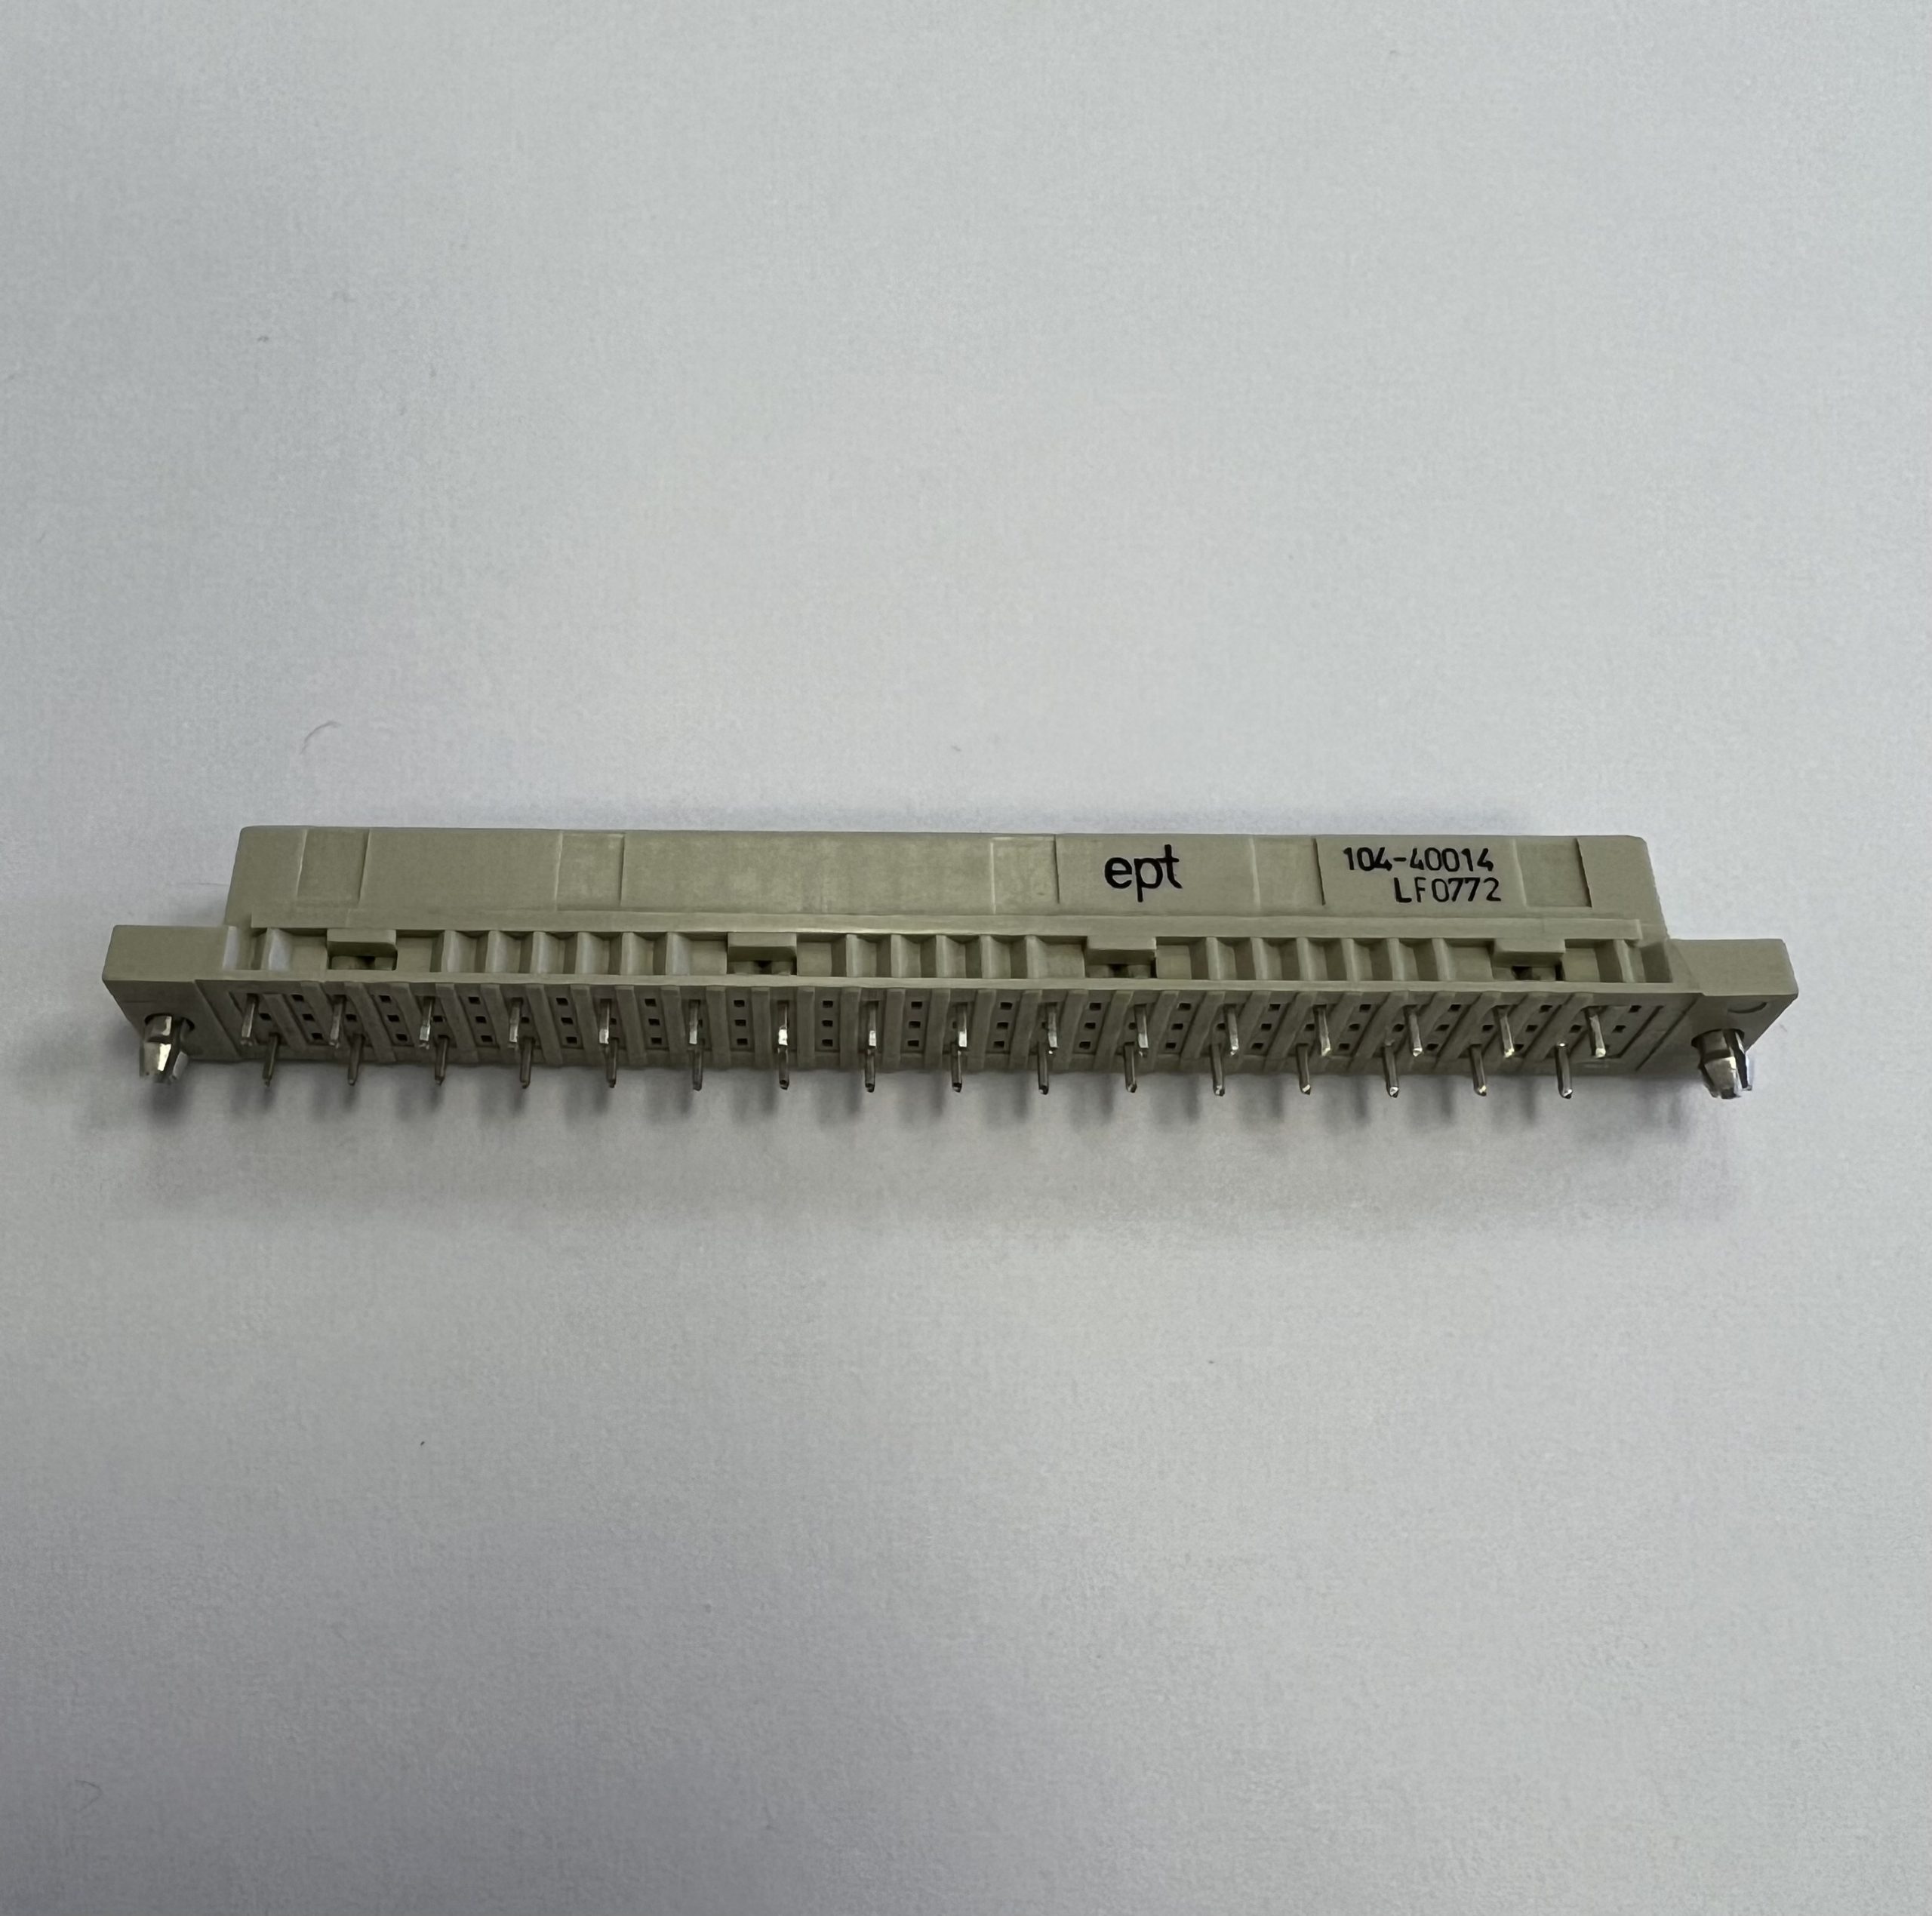 EPT DIN 41612 Female Straight Connector Type C